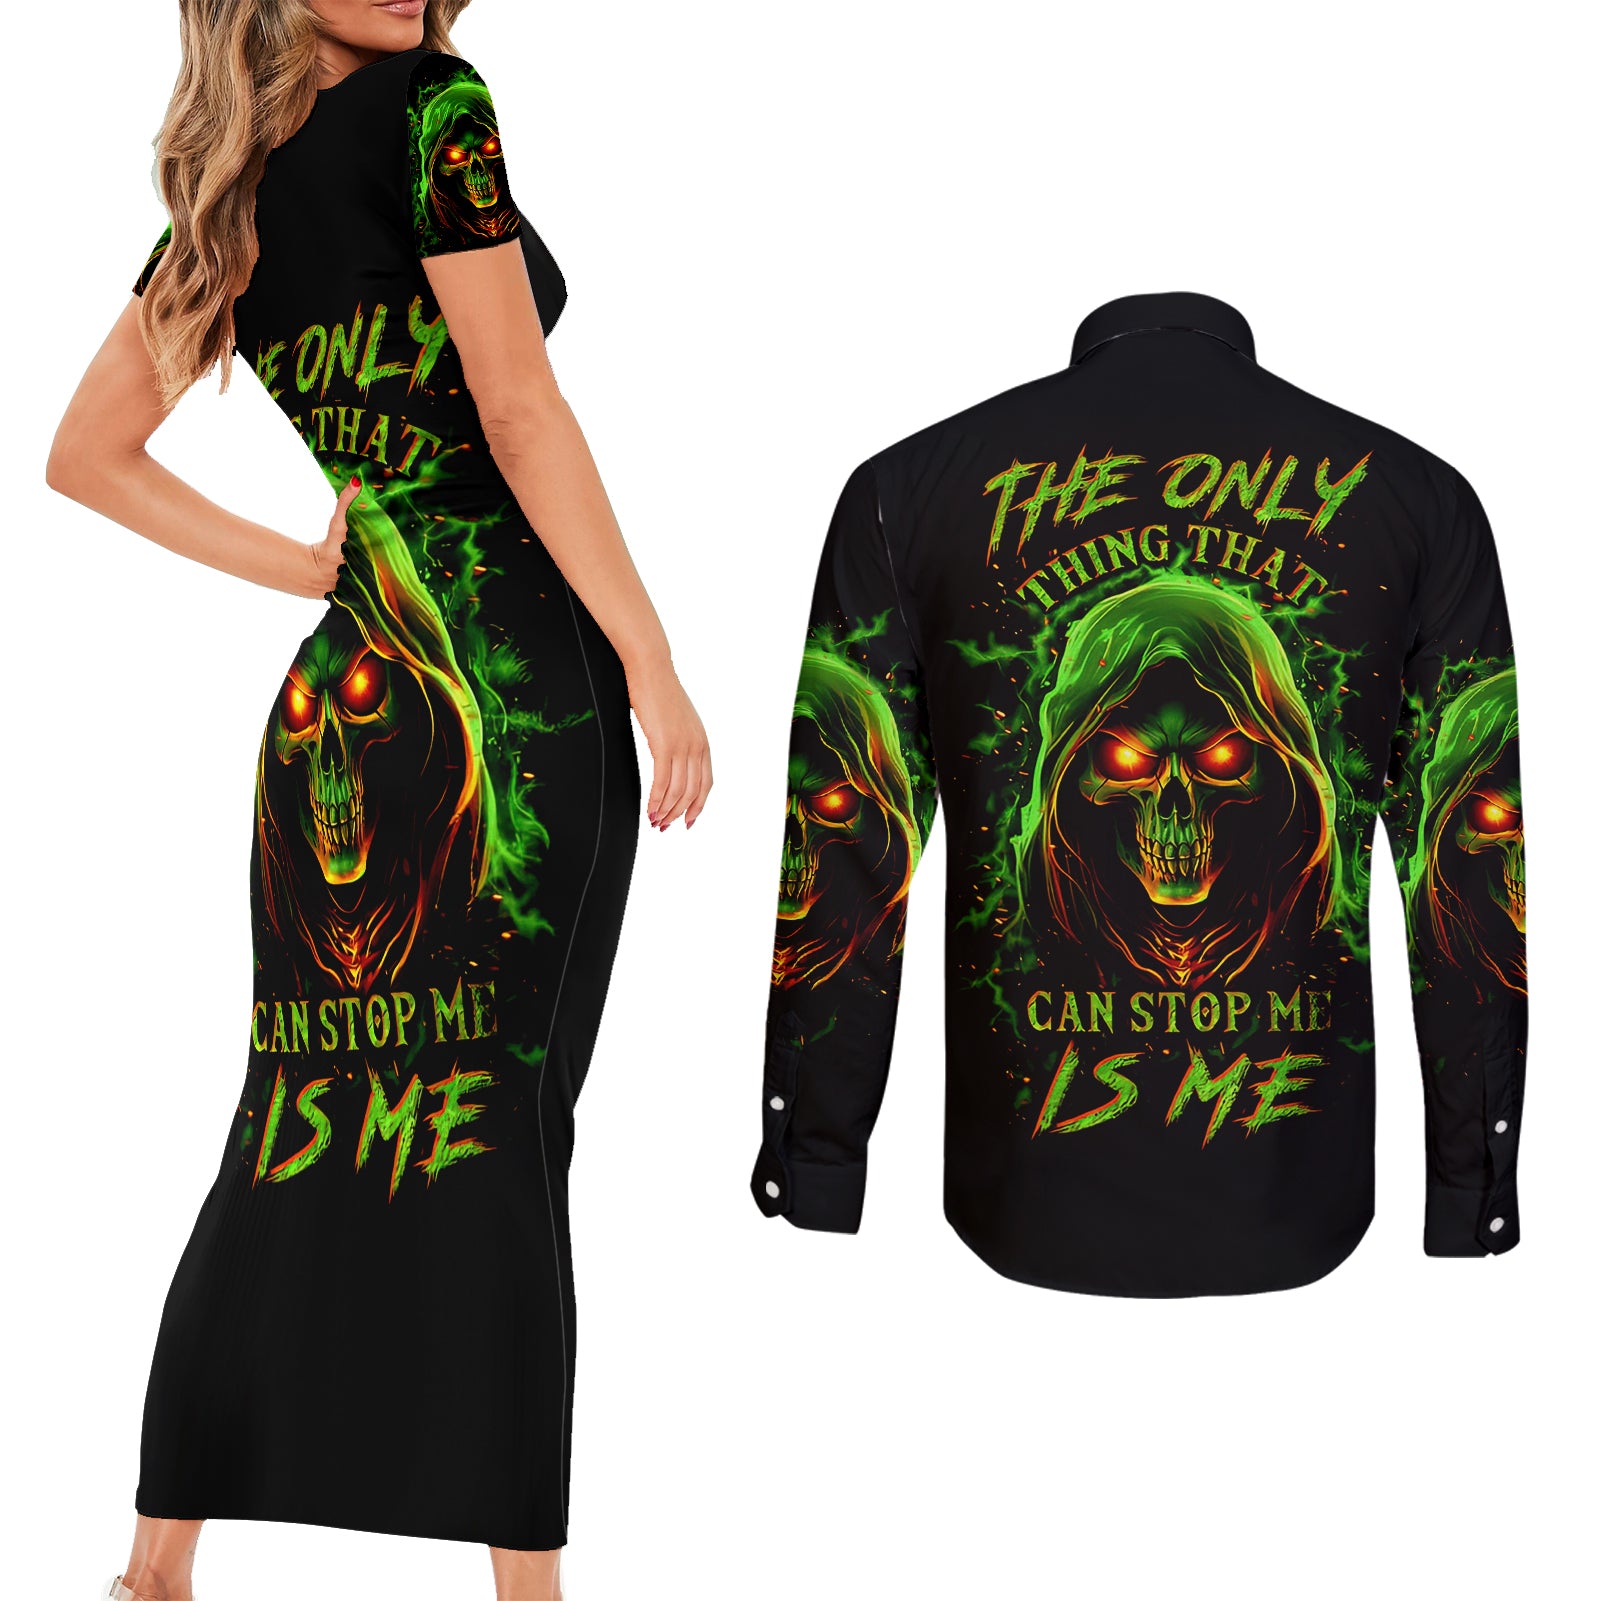 fire-death-skull-couples-matching-short-sleeve-bodycon-dress-and-long-sleeve-button-shirts-the-only-thing-that-can-stop-is-me